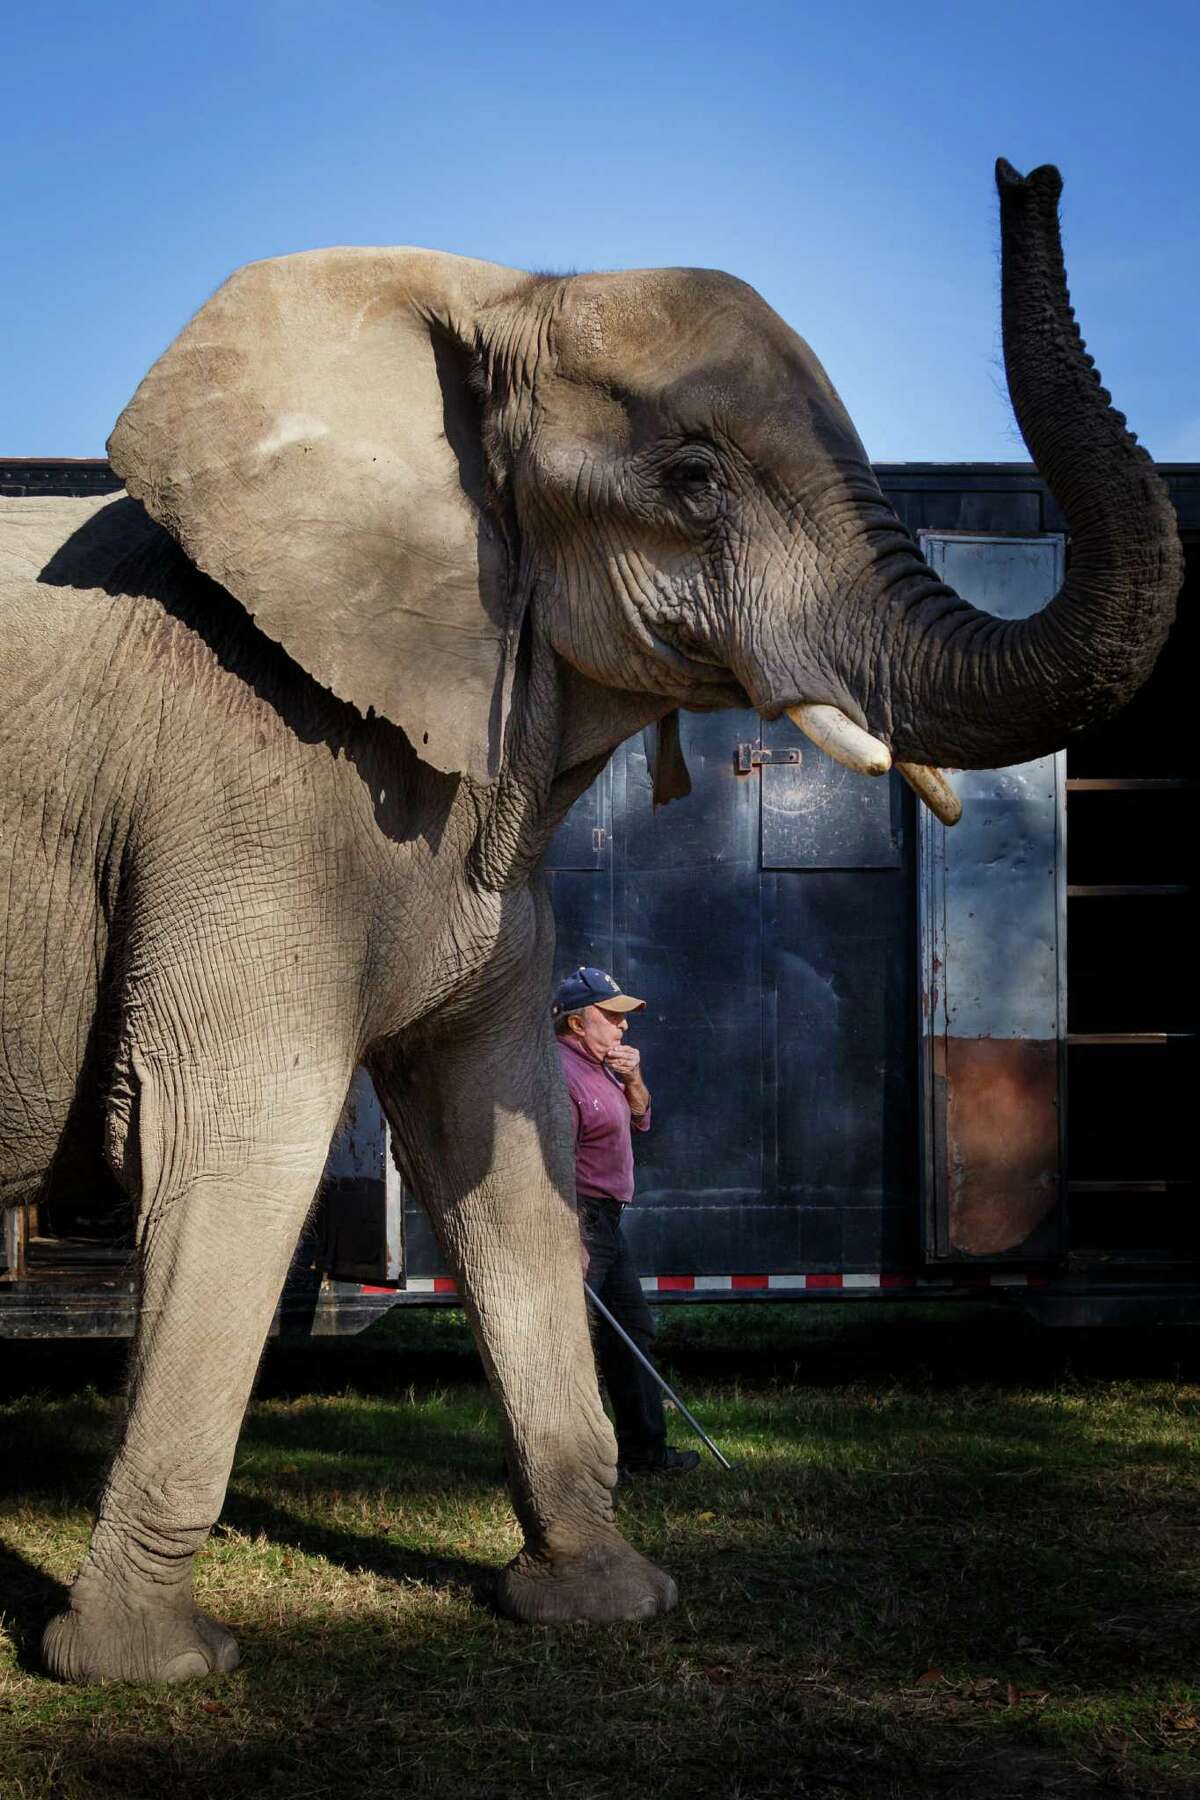 Bill Swain leads his 29-year-old African elephant Page to her barn while working with the animals at his home, Tuesday, Dec. 10, 2013, in Cut and Shoot. Swain has made a career showing his elephants at Renaissance Festivals, weddings, private parties and Christmas manger scenes. ( Michael Paulsen / Houston Chronicle )